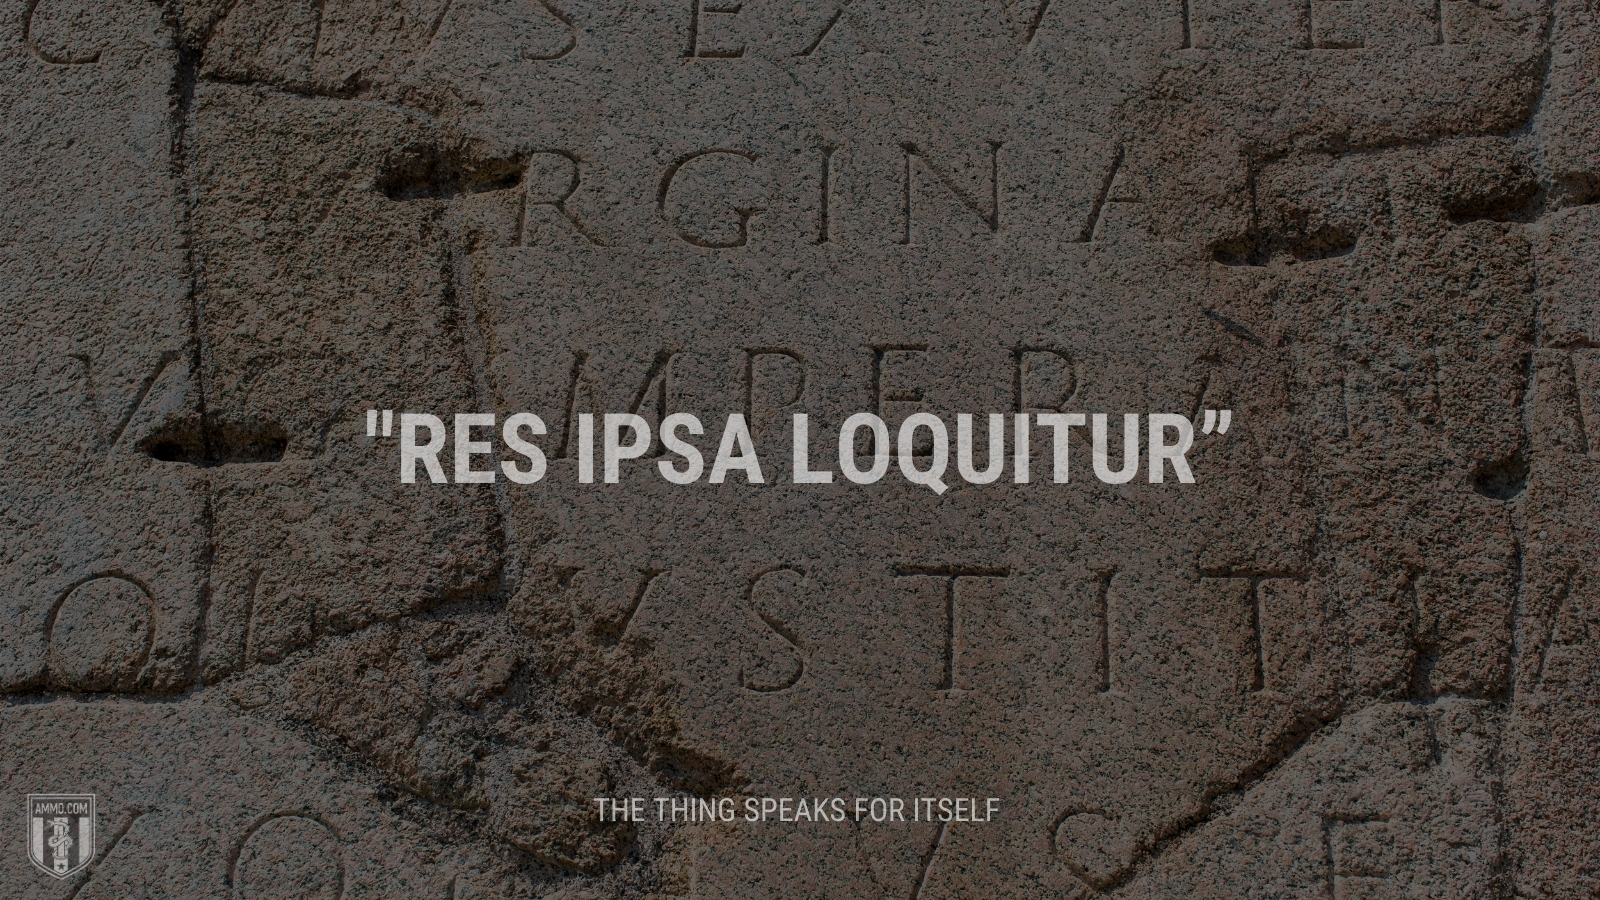 “Res ipsa loquitur” - The thing speaks for itself